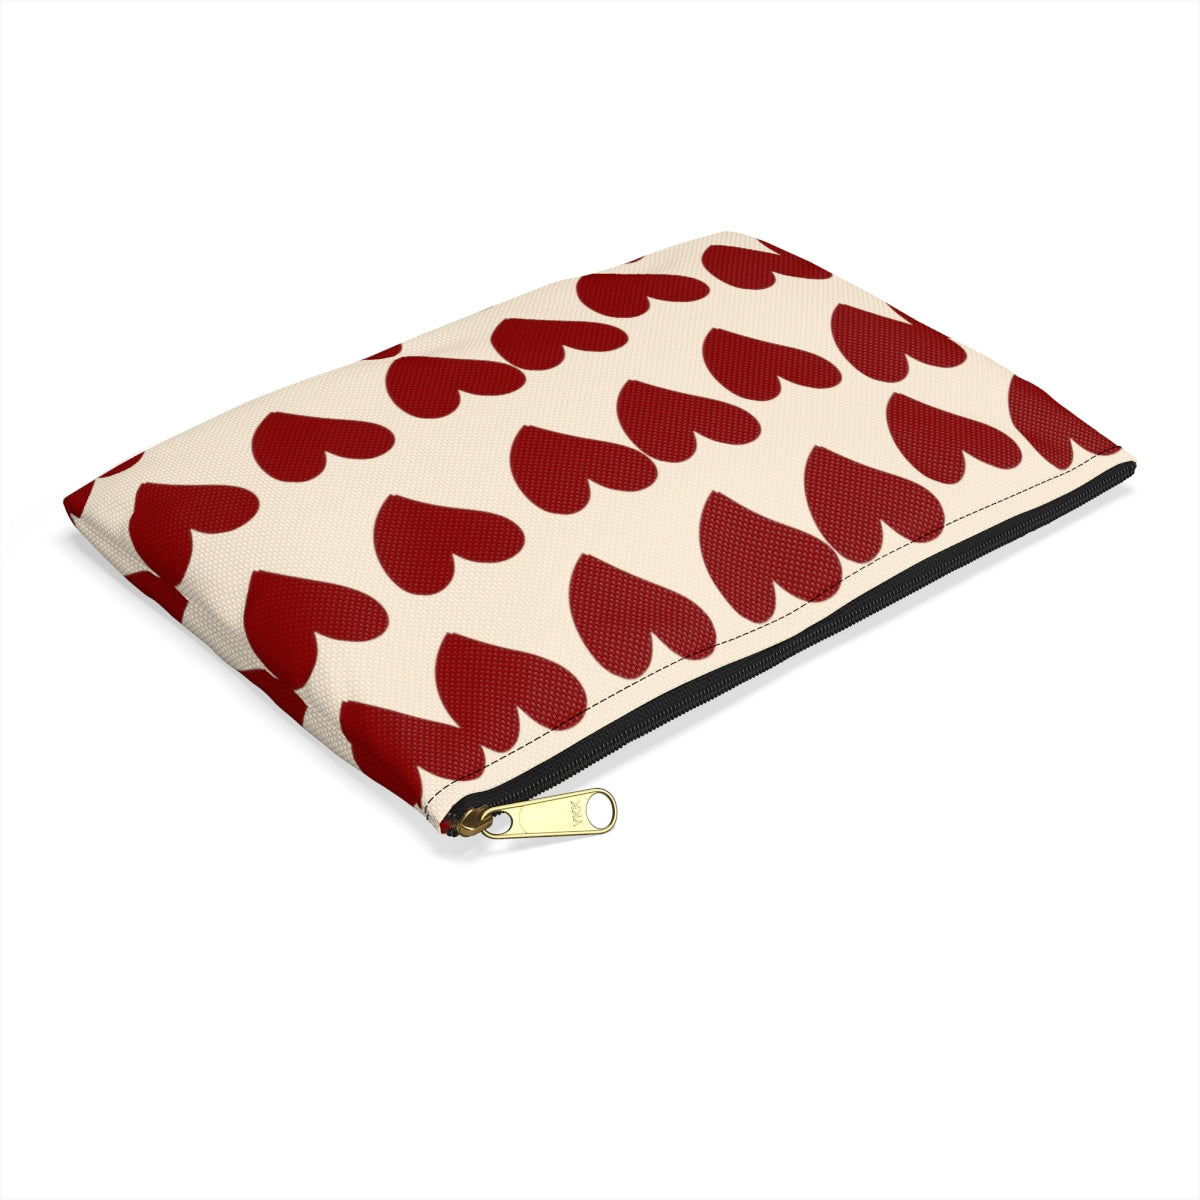 Loving Hearts Accessory Pouch